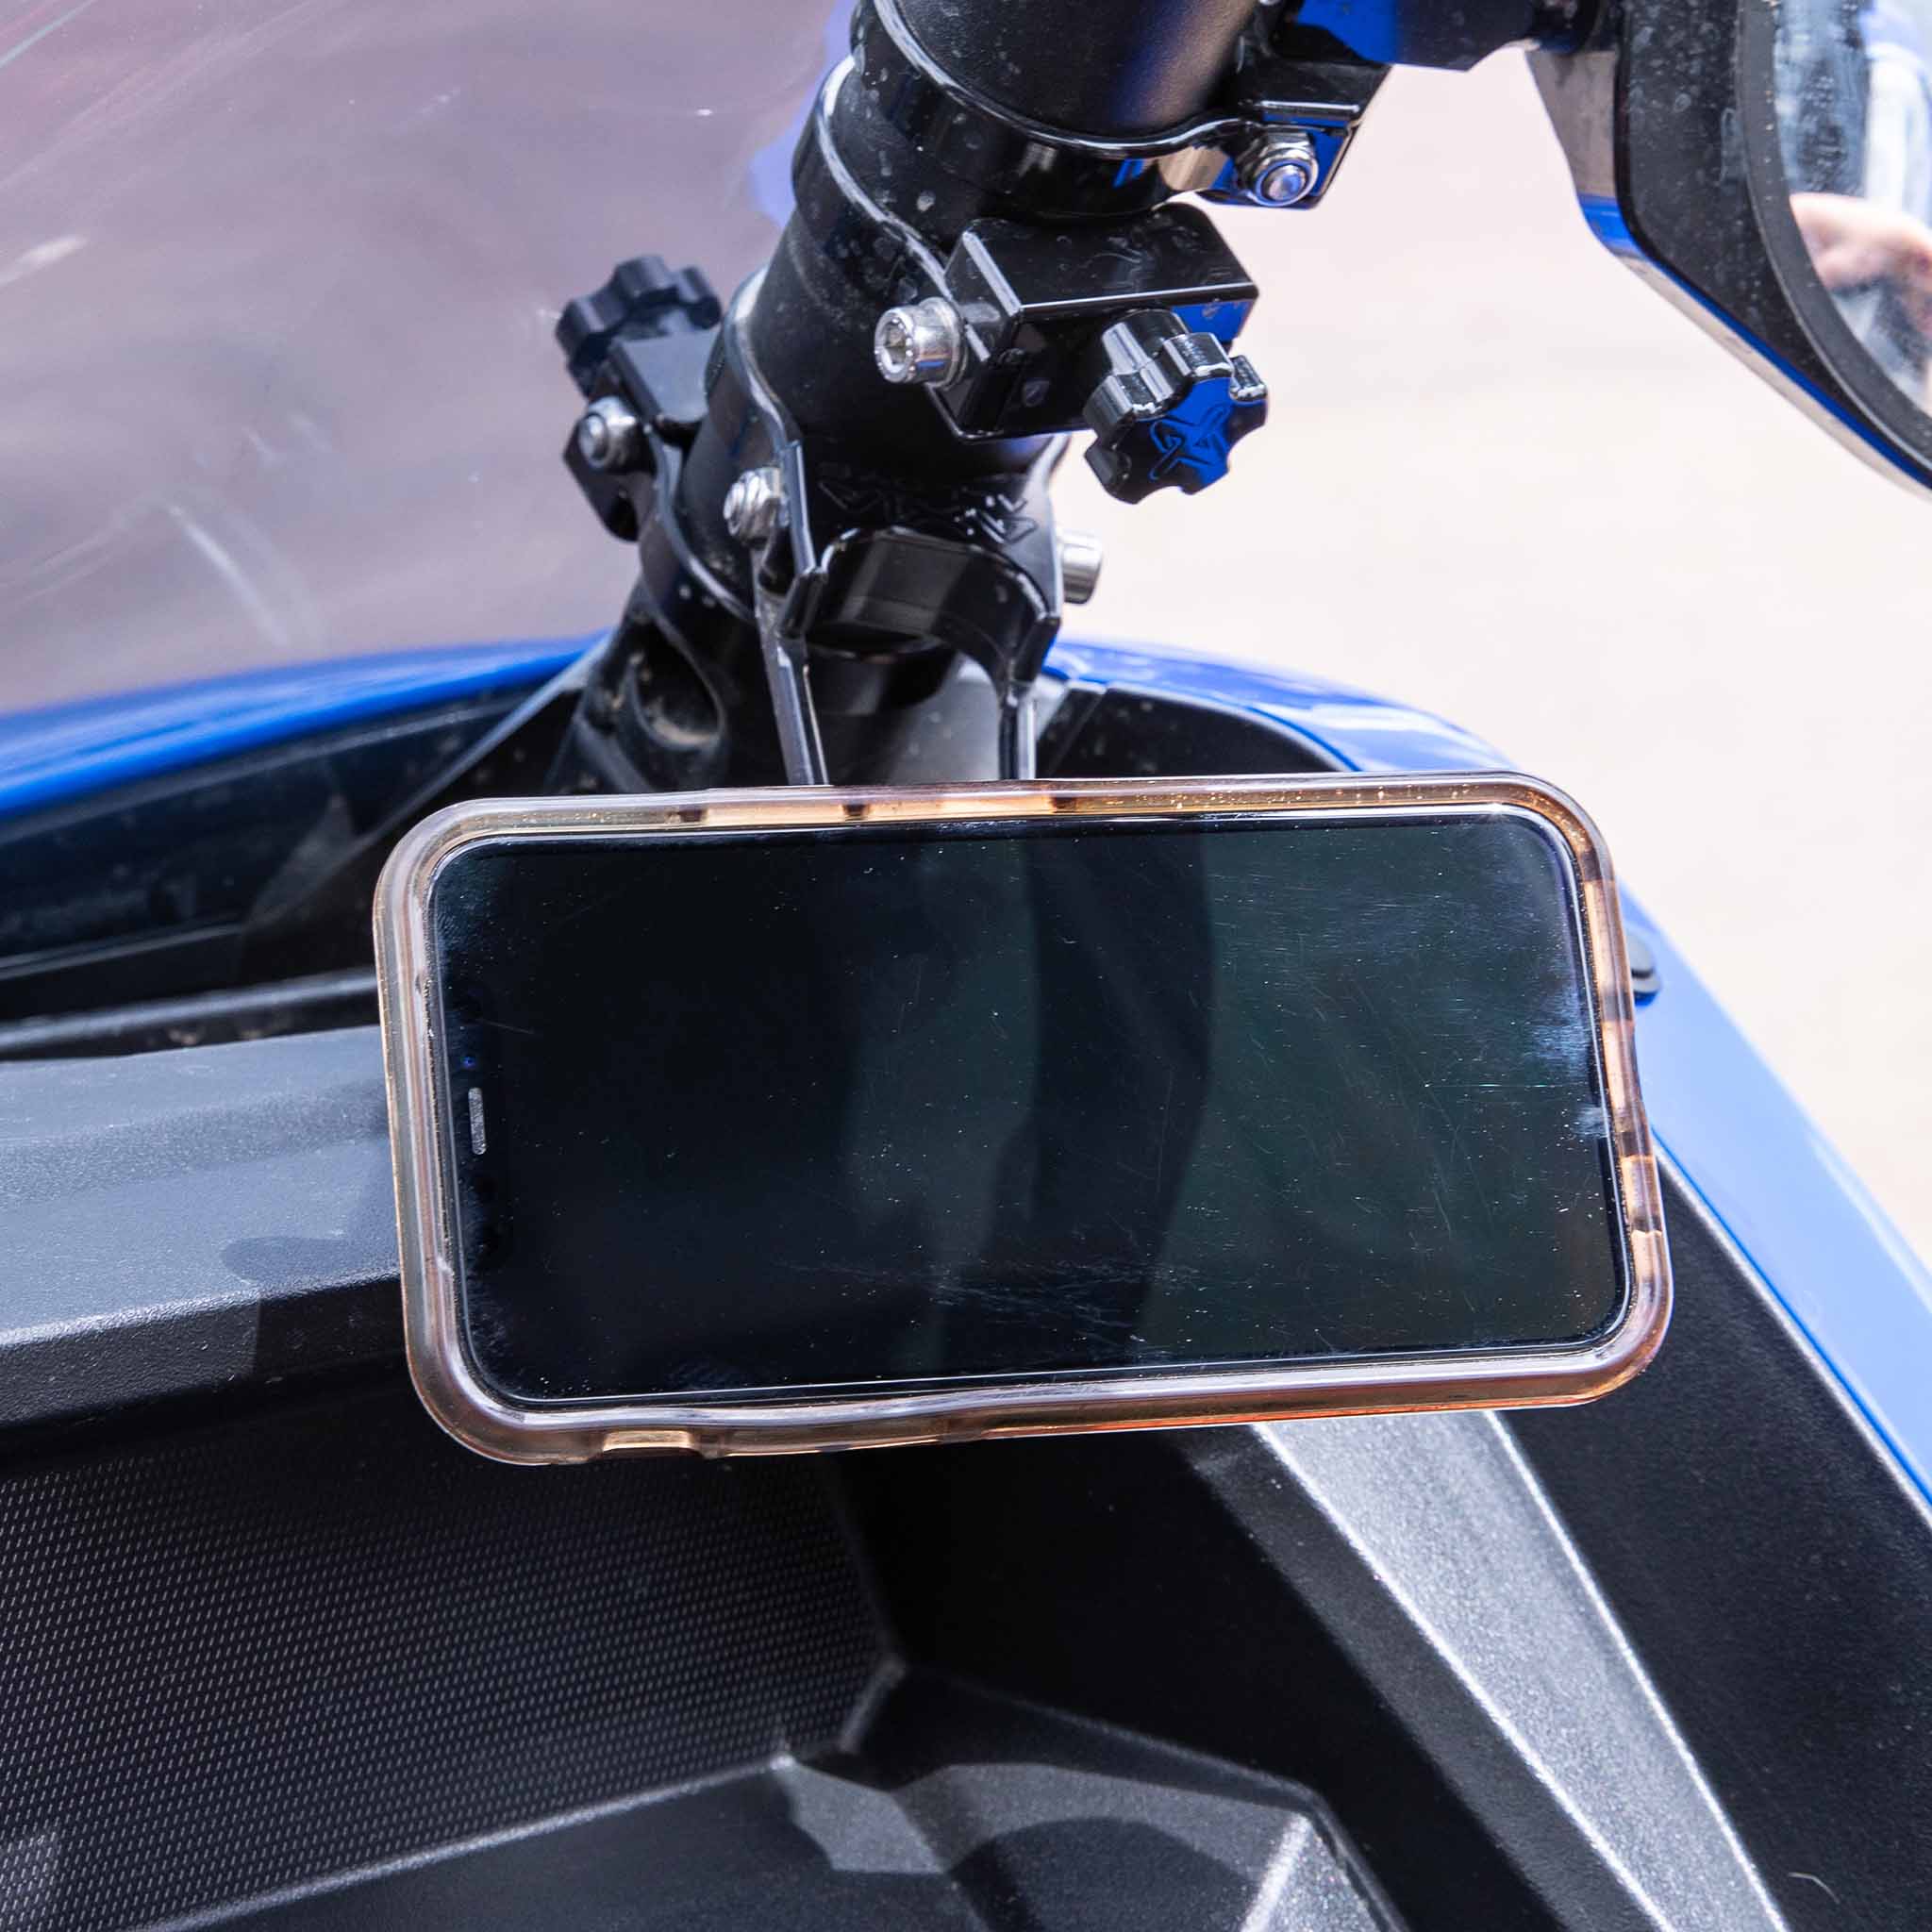 1.75" Offset Roll Cage Magnetic Phone Mount shown on Kawasaki KRX 1000 side by side(1.75" Mount shown on Kawasaki KRX 1000 - rotate and adjust for perfect placement)